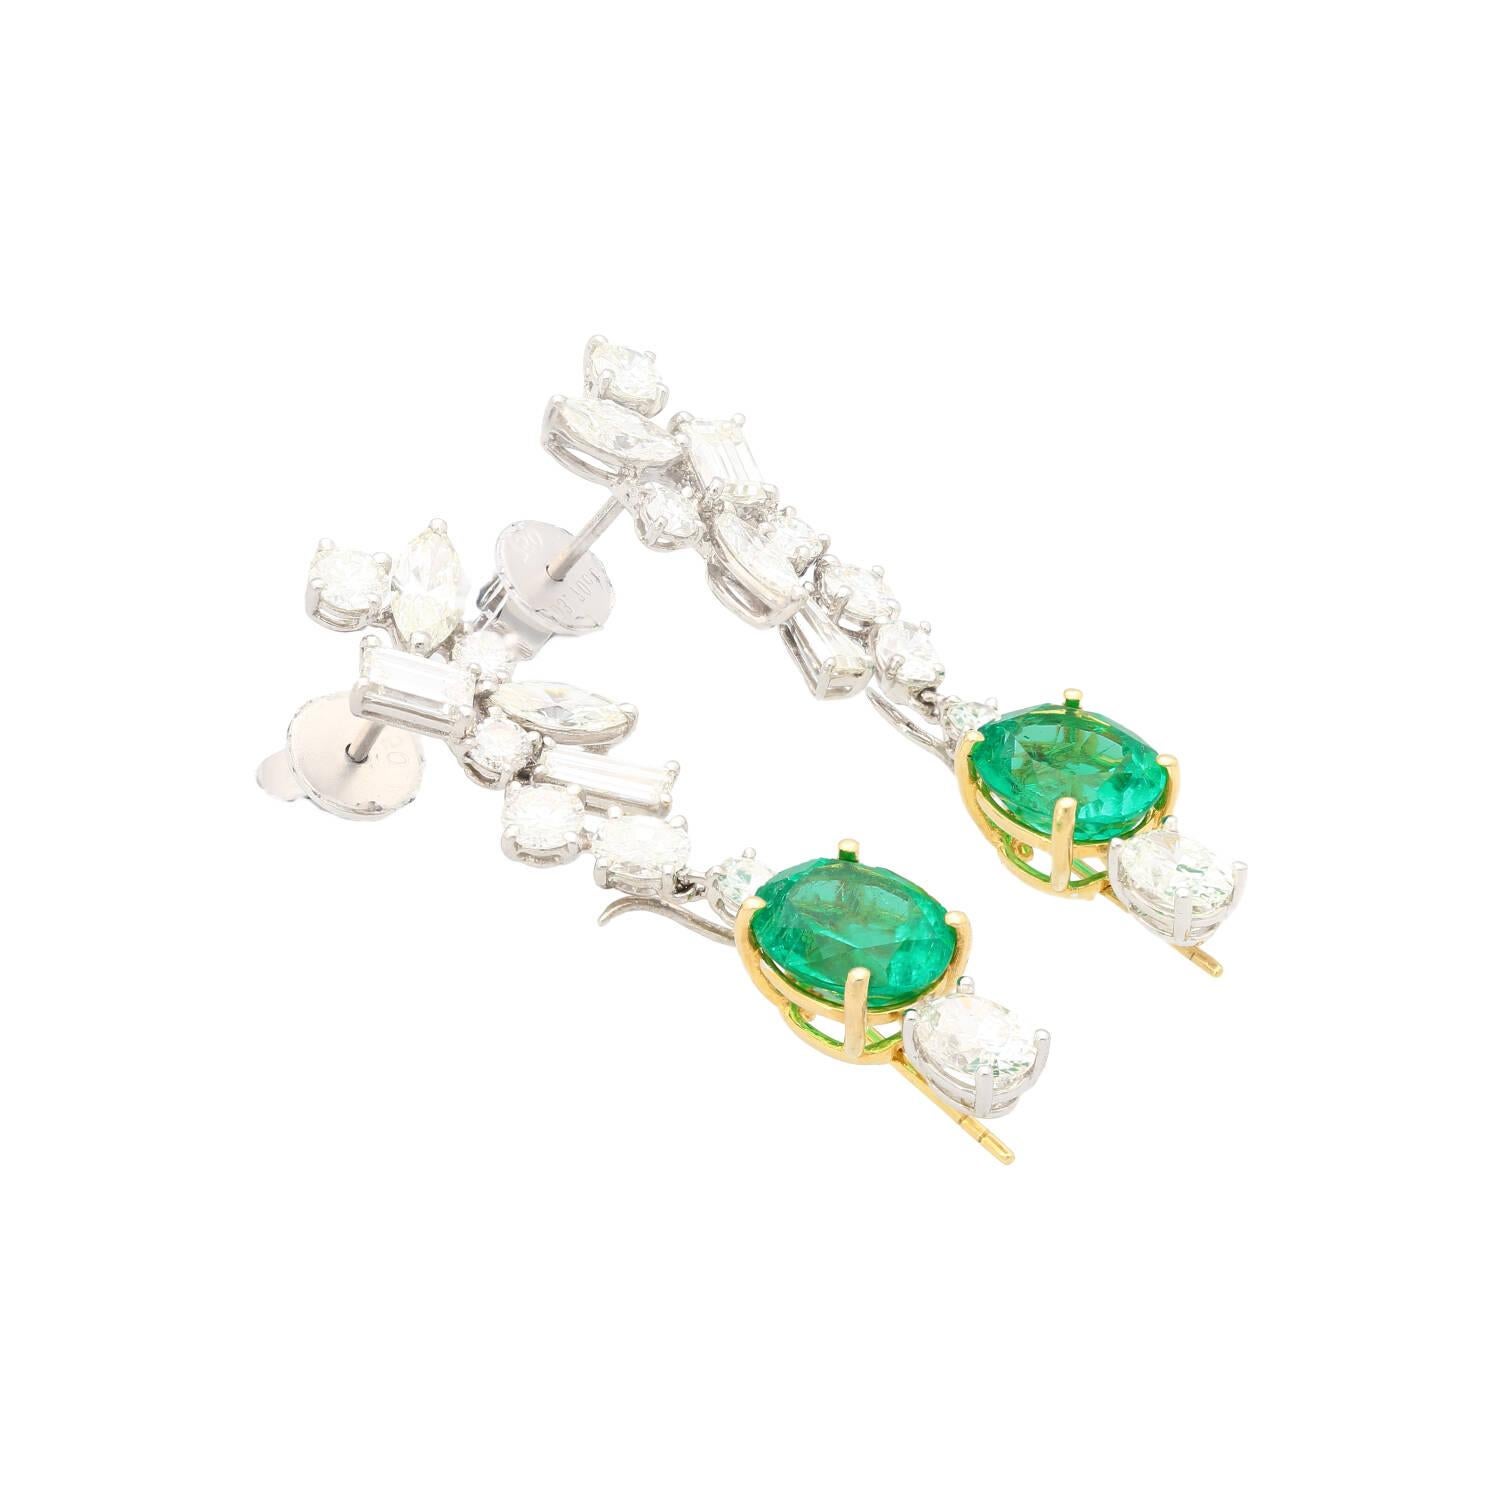 18K Yellow and White Gold detachable drop earrings. Featuring a symphony of natural emeralds and diamonds. Set with two Oval Cut Colombian Emeralds, weighing 2.37 and 2.29 carats and originating from Colombia. One of which is GRS certified